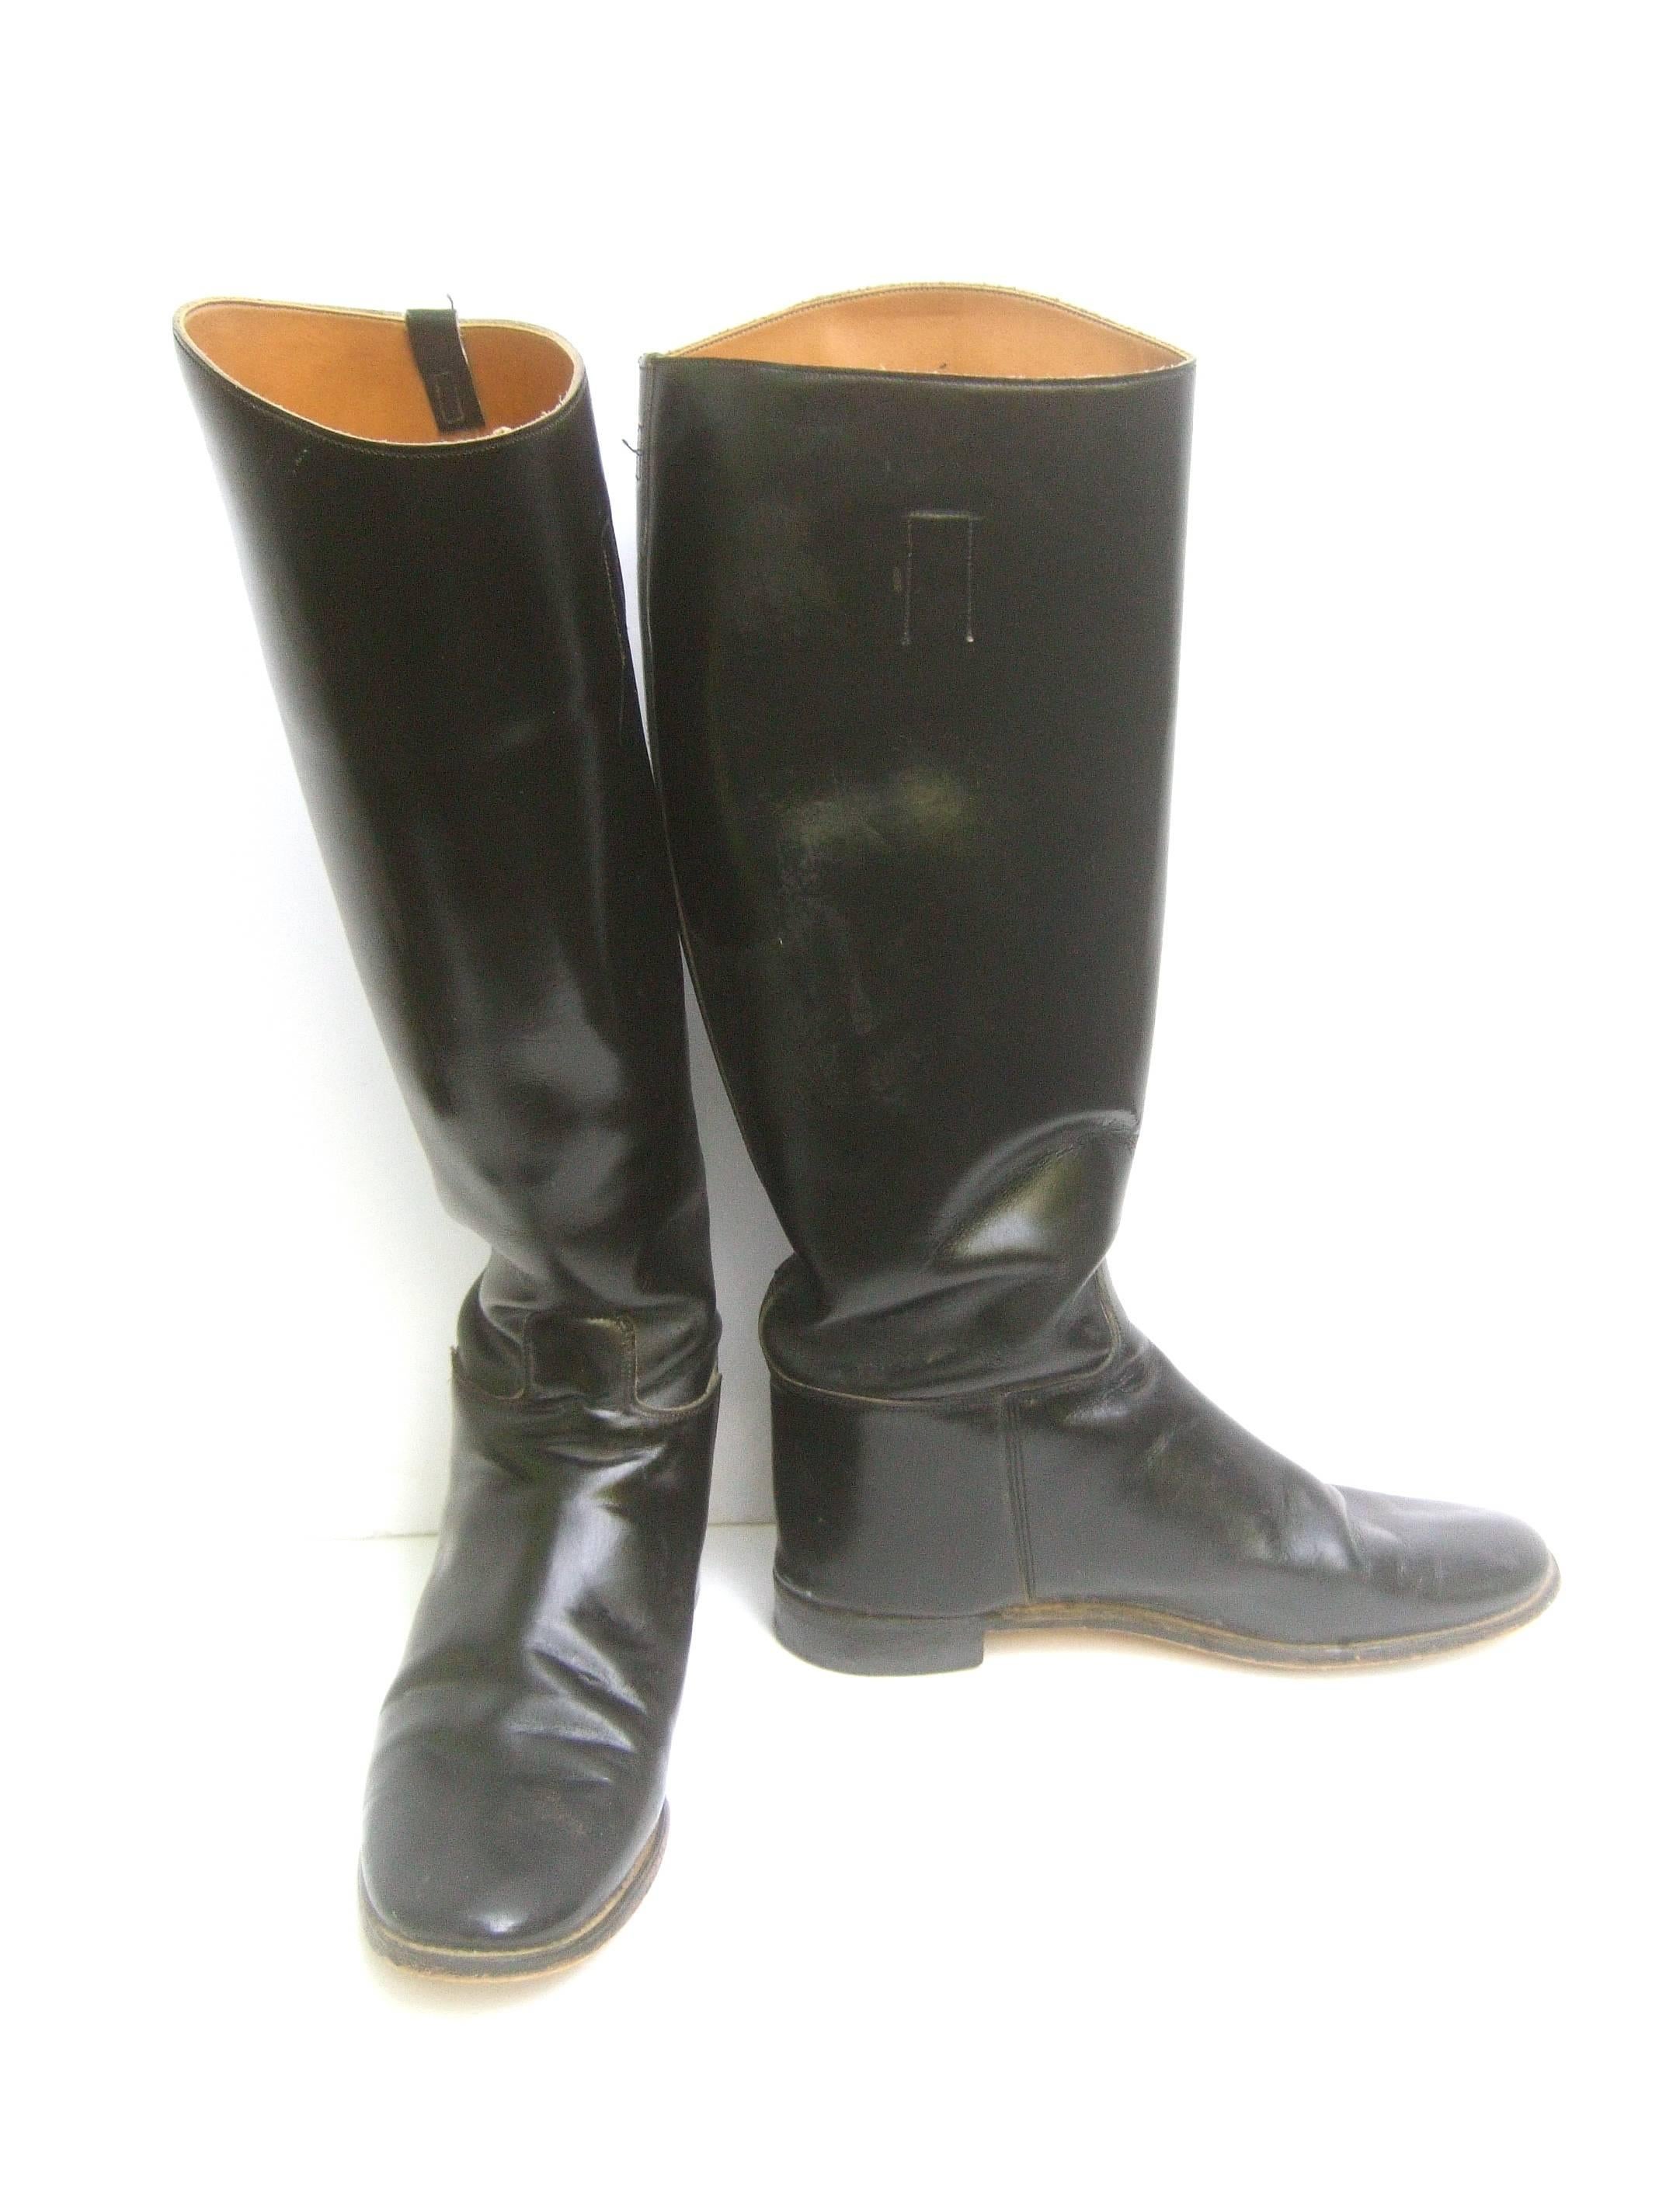 Men's English equestrian black leather riding boots US Size 8.5
The classic black leather riding boots are designed
by Marlborough of England 

They make a great accessory for hunting, jumping & polo
Paired with the boot hook claw in order